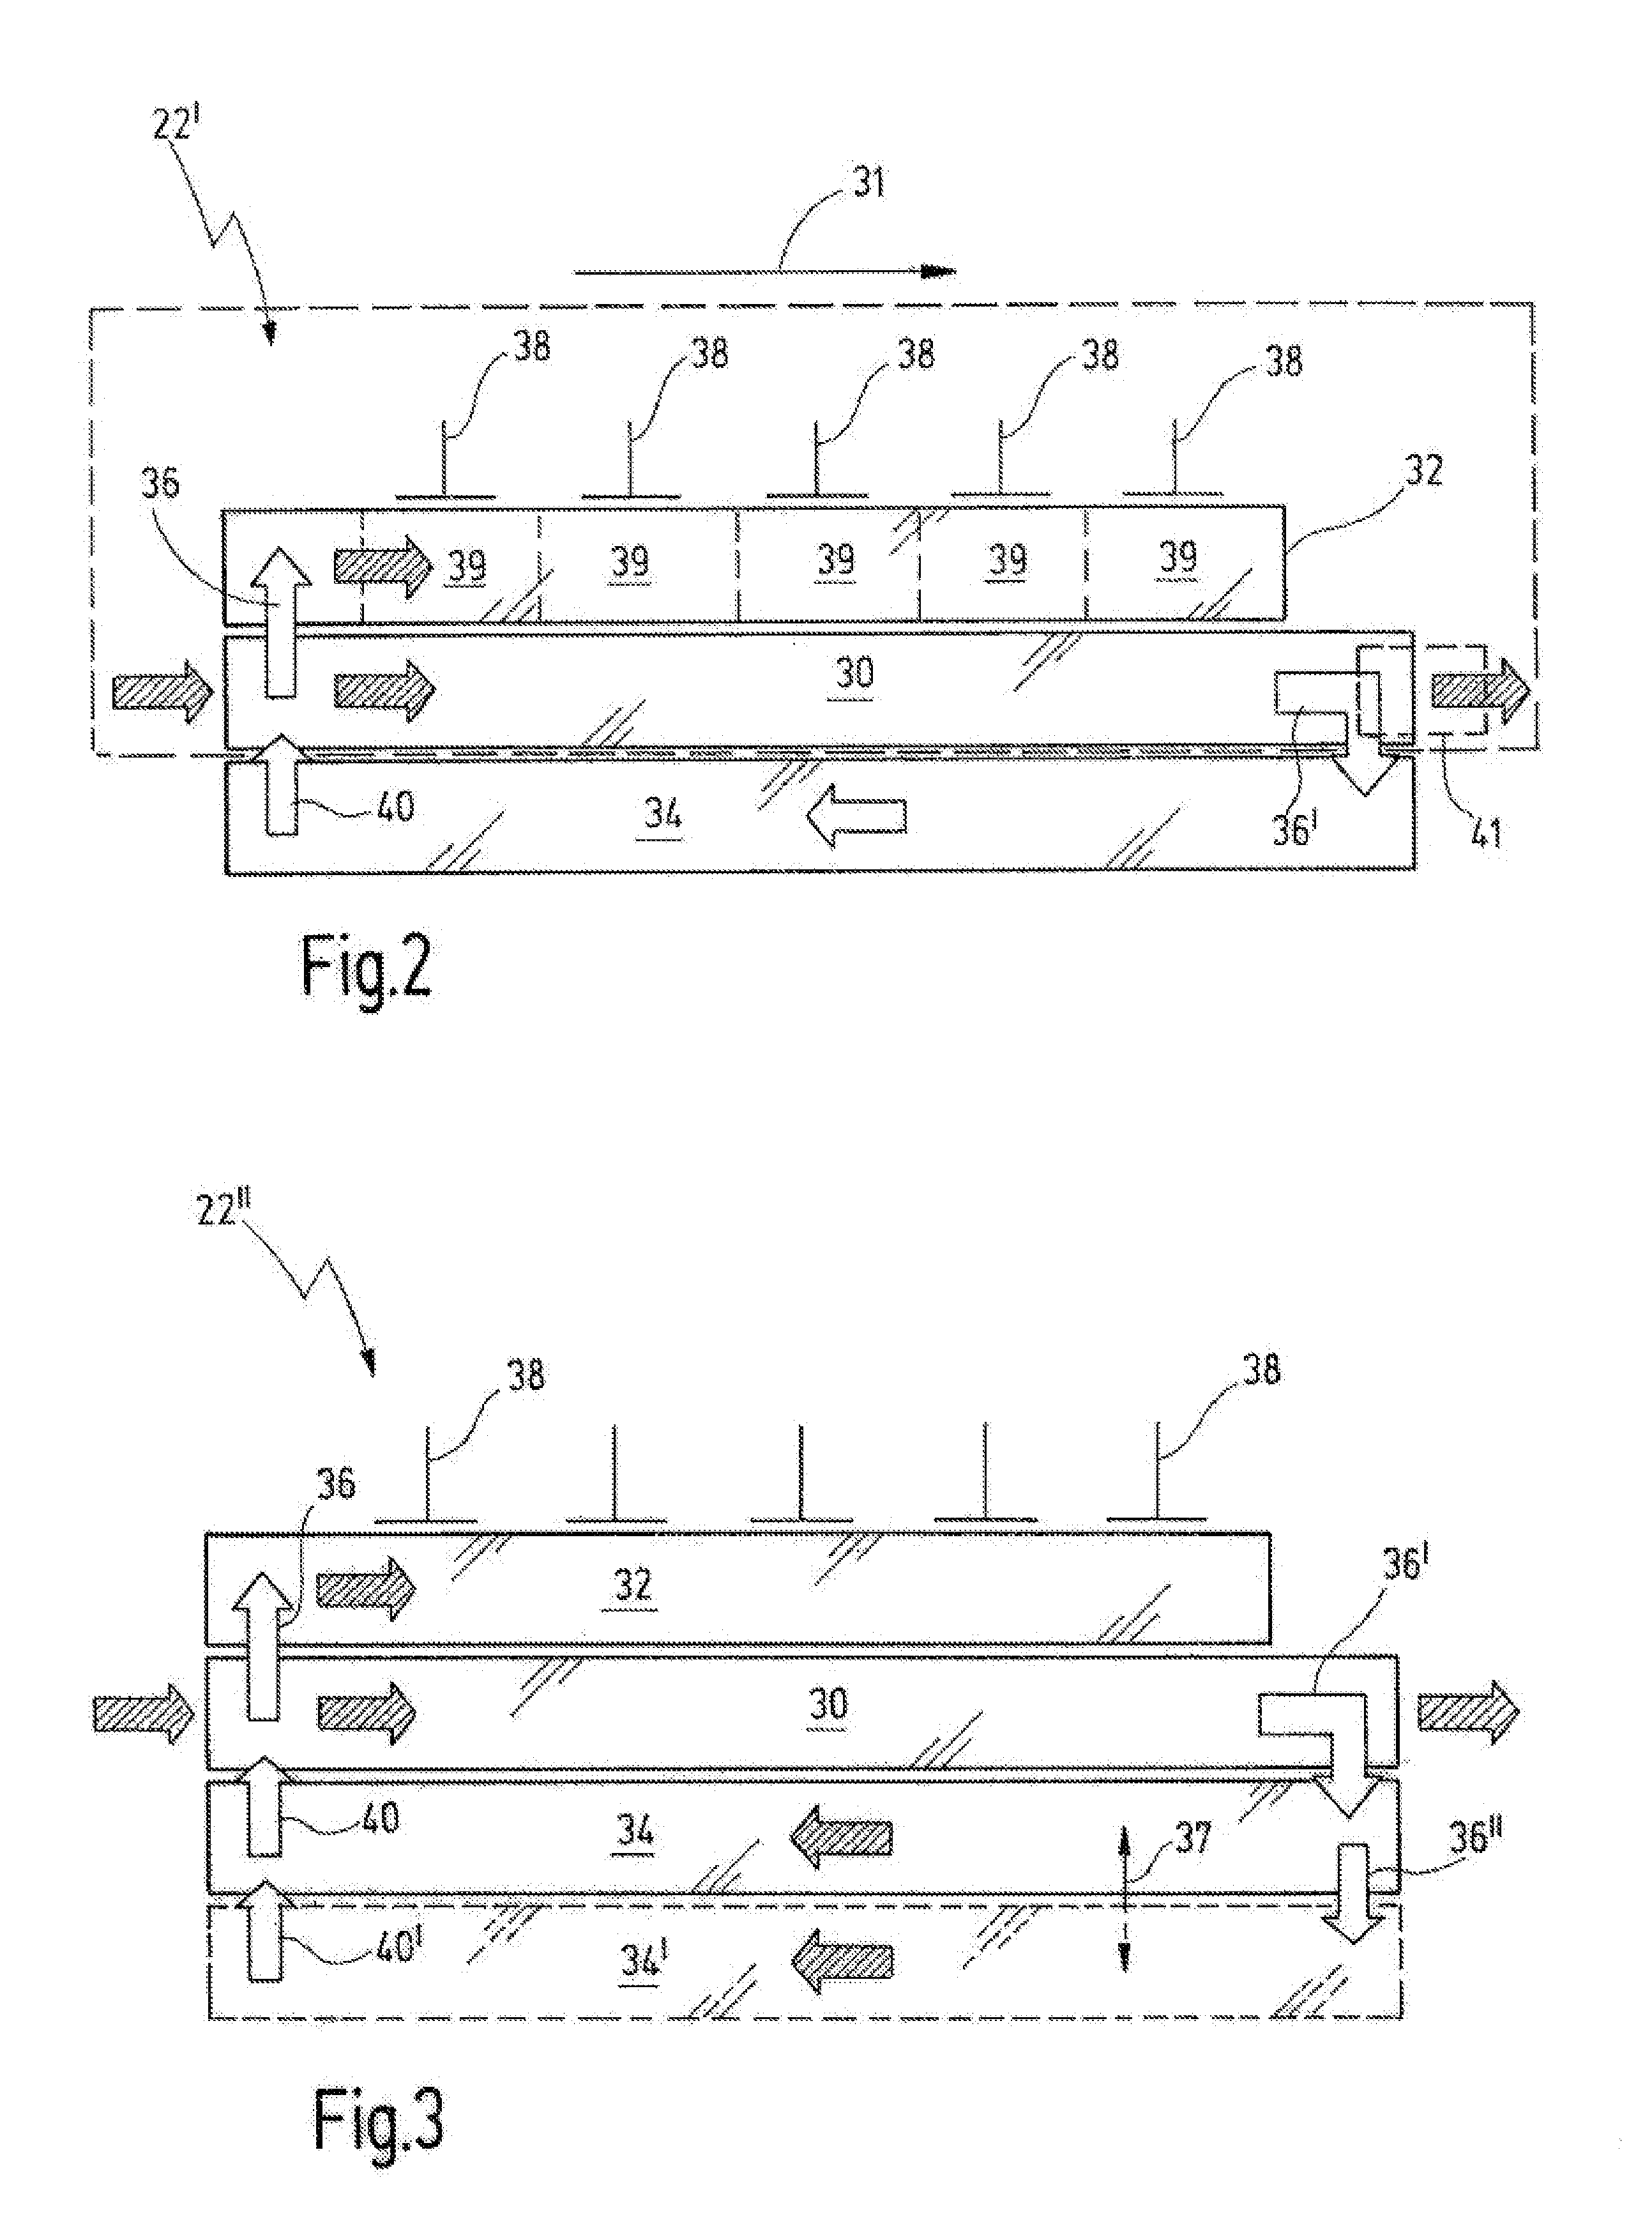 Scalable shipping buffer having an integrated sorting function and corresponding method